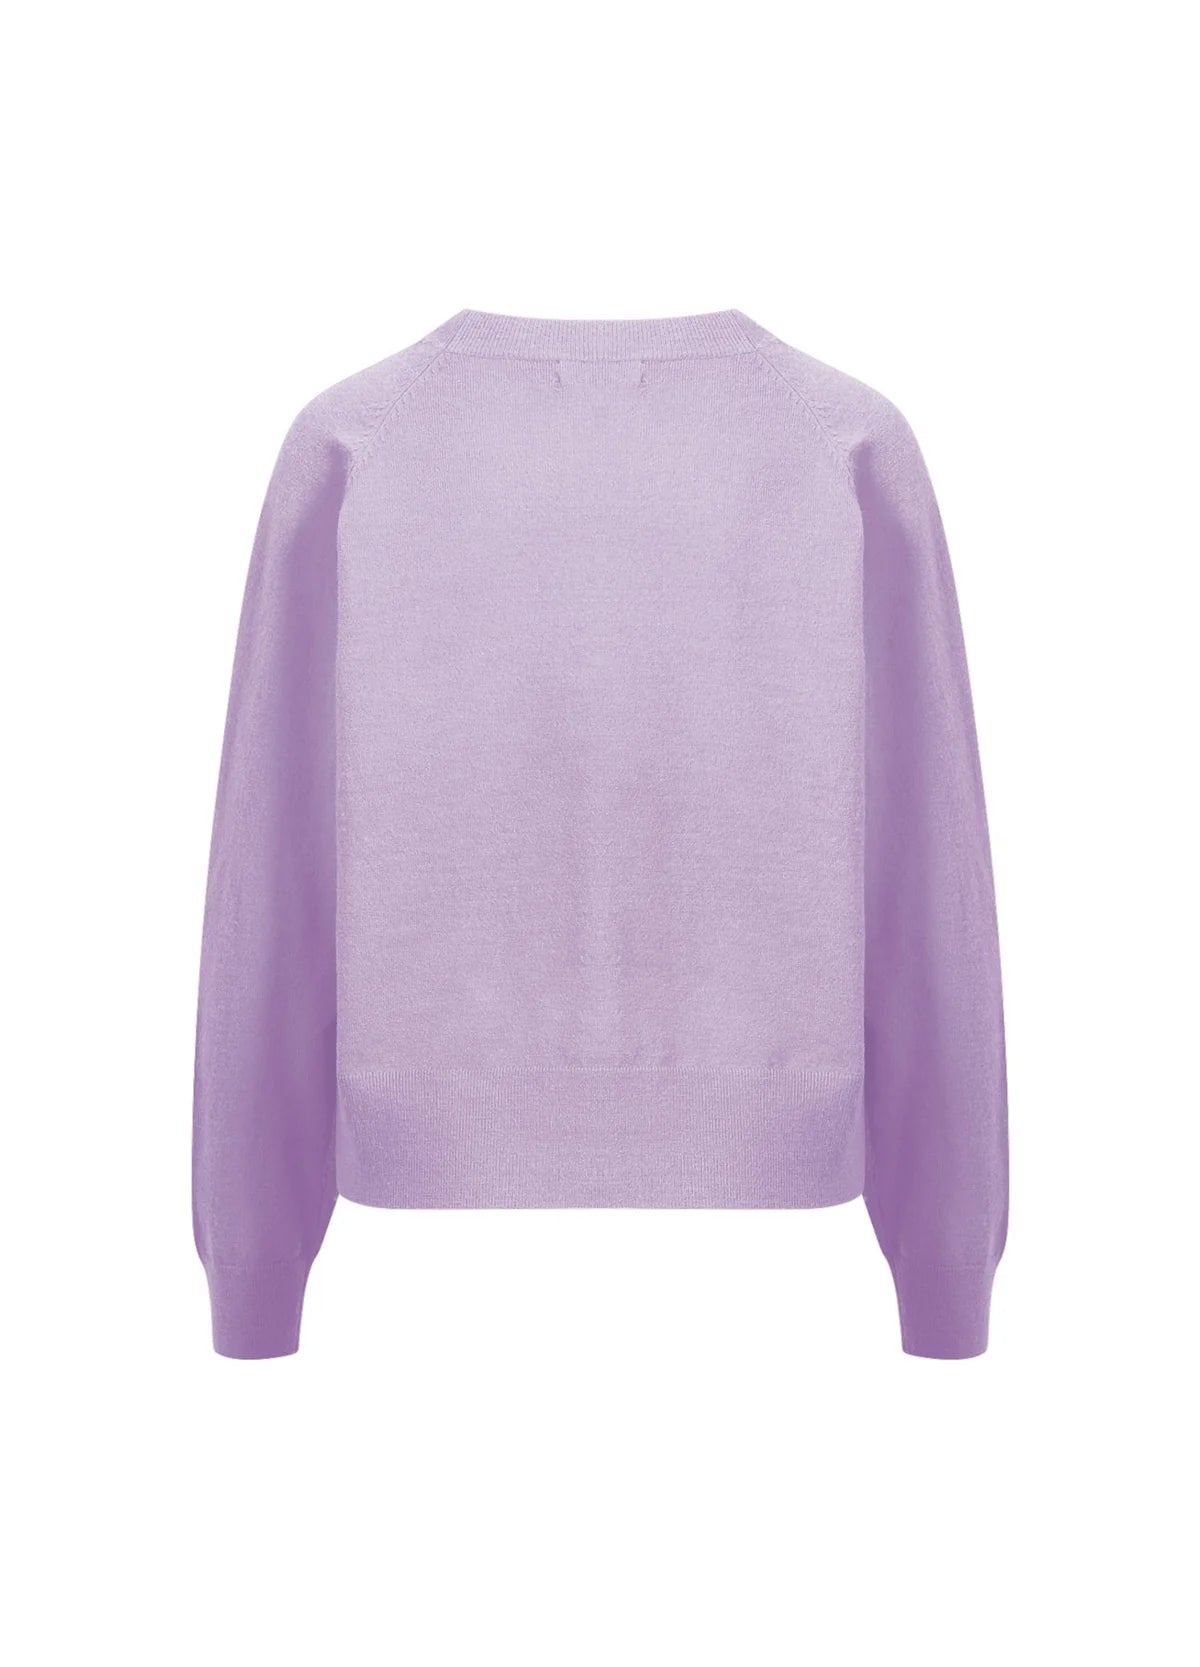 Coster Daily Knit in Lavender